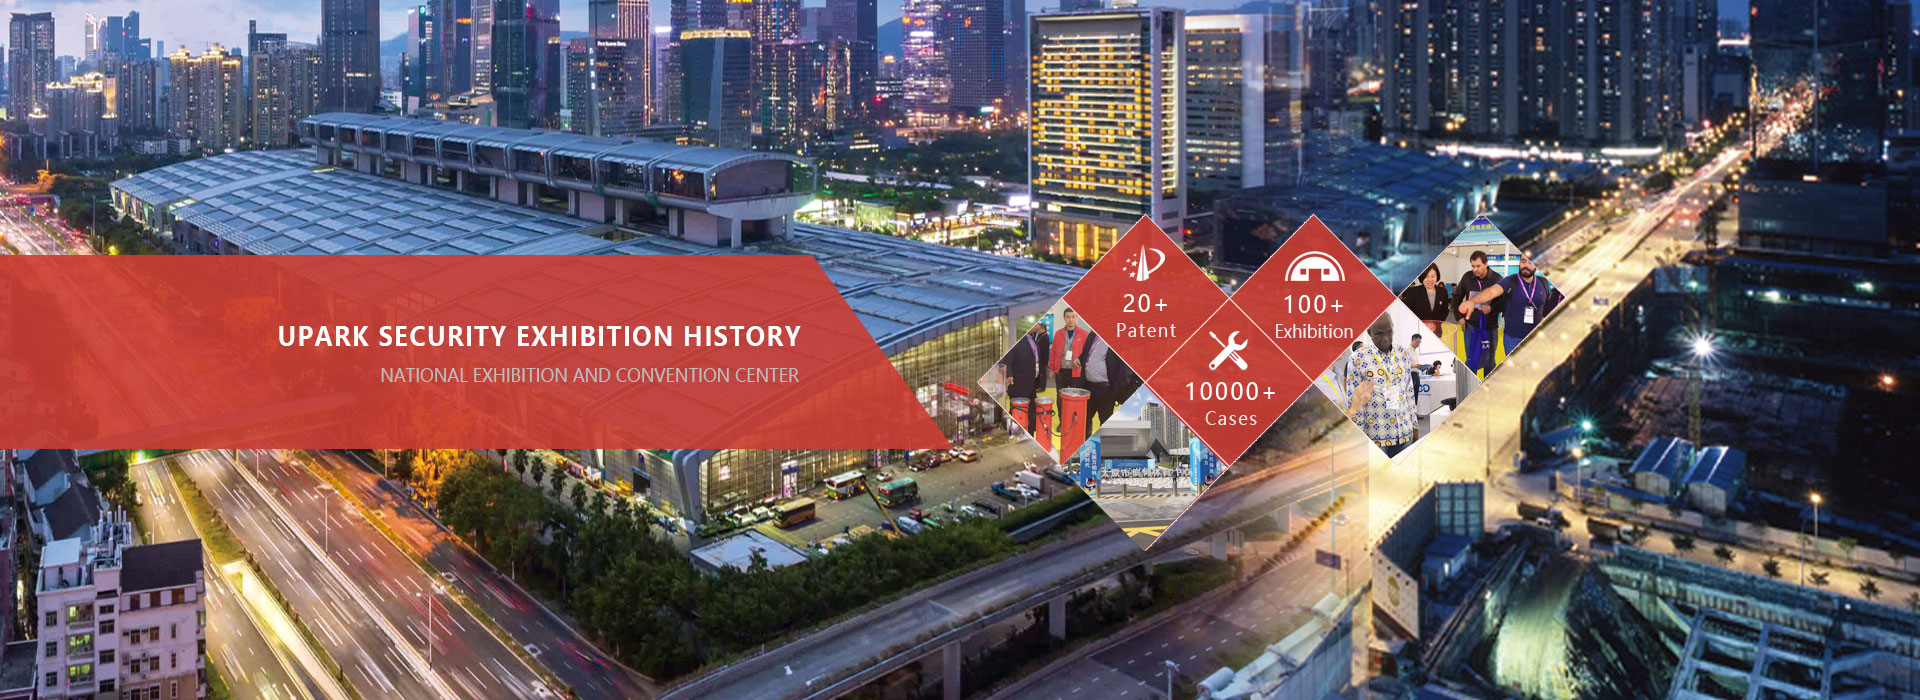 UPARK SECURITY EXHIBITION HISTORY